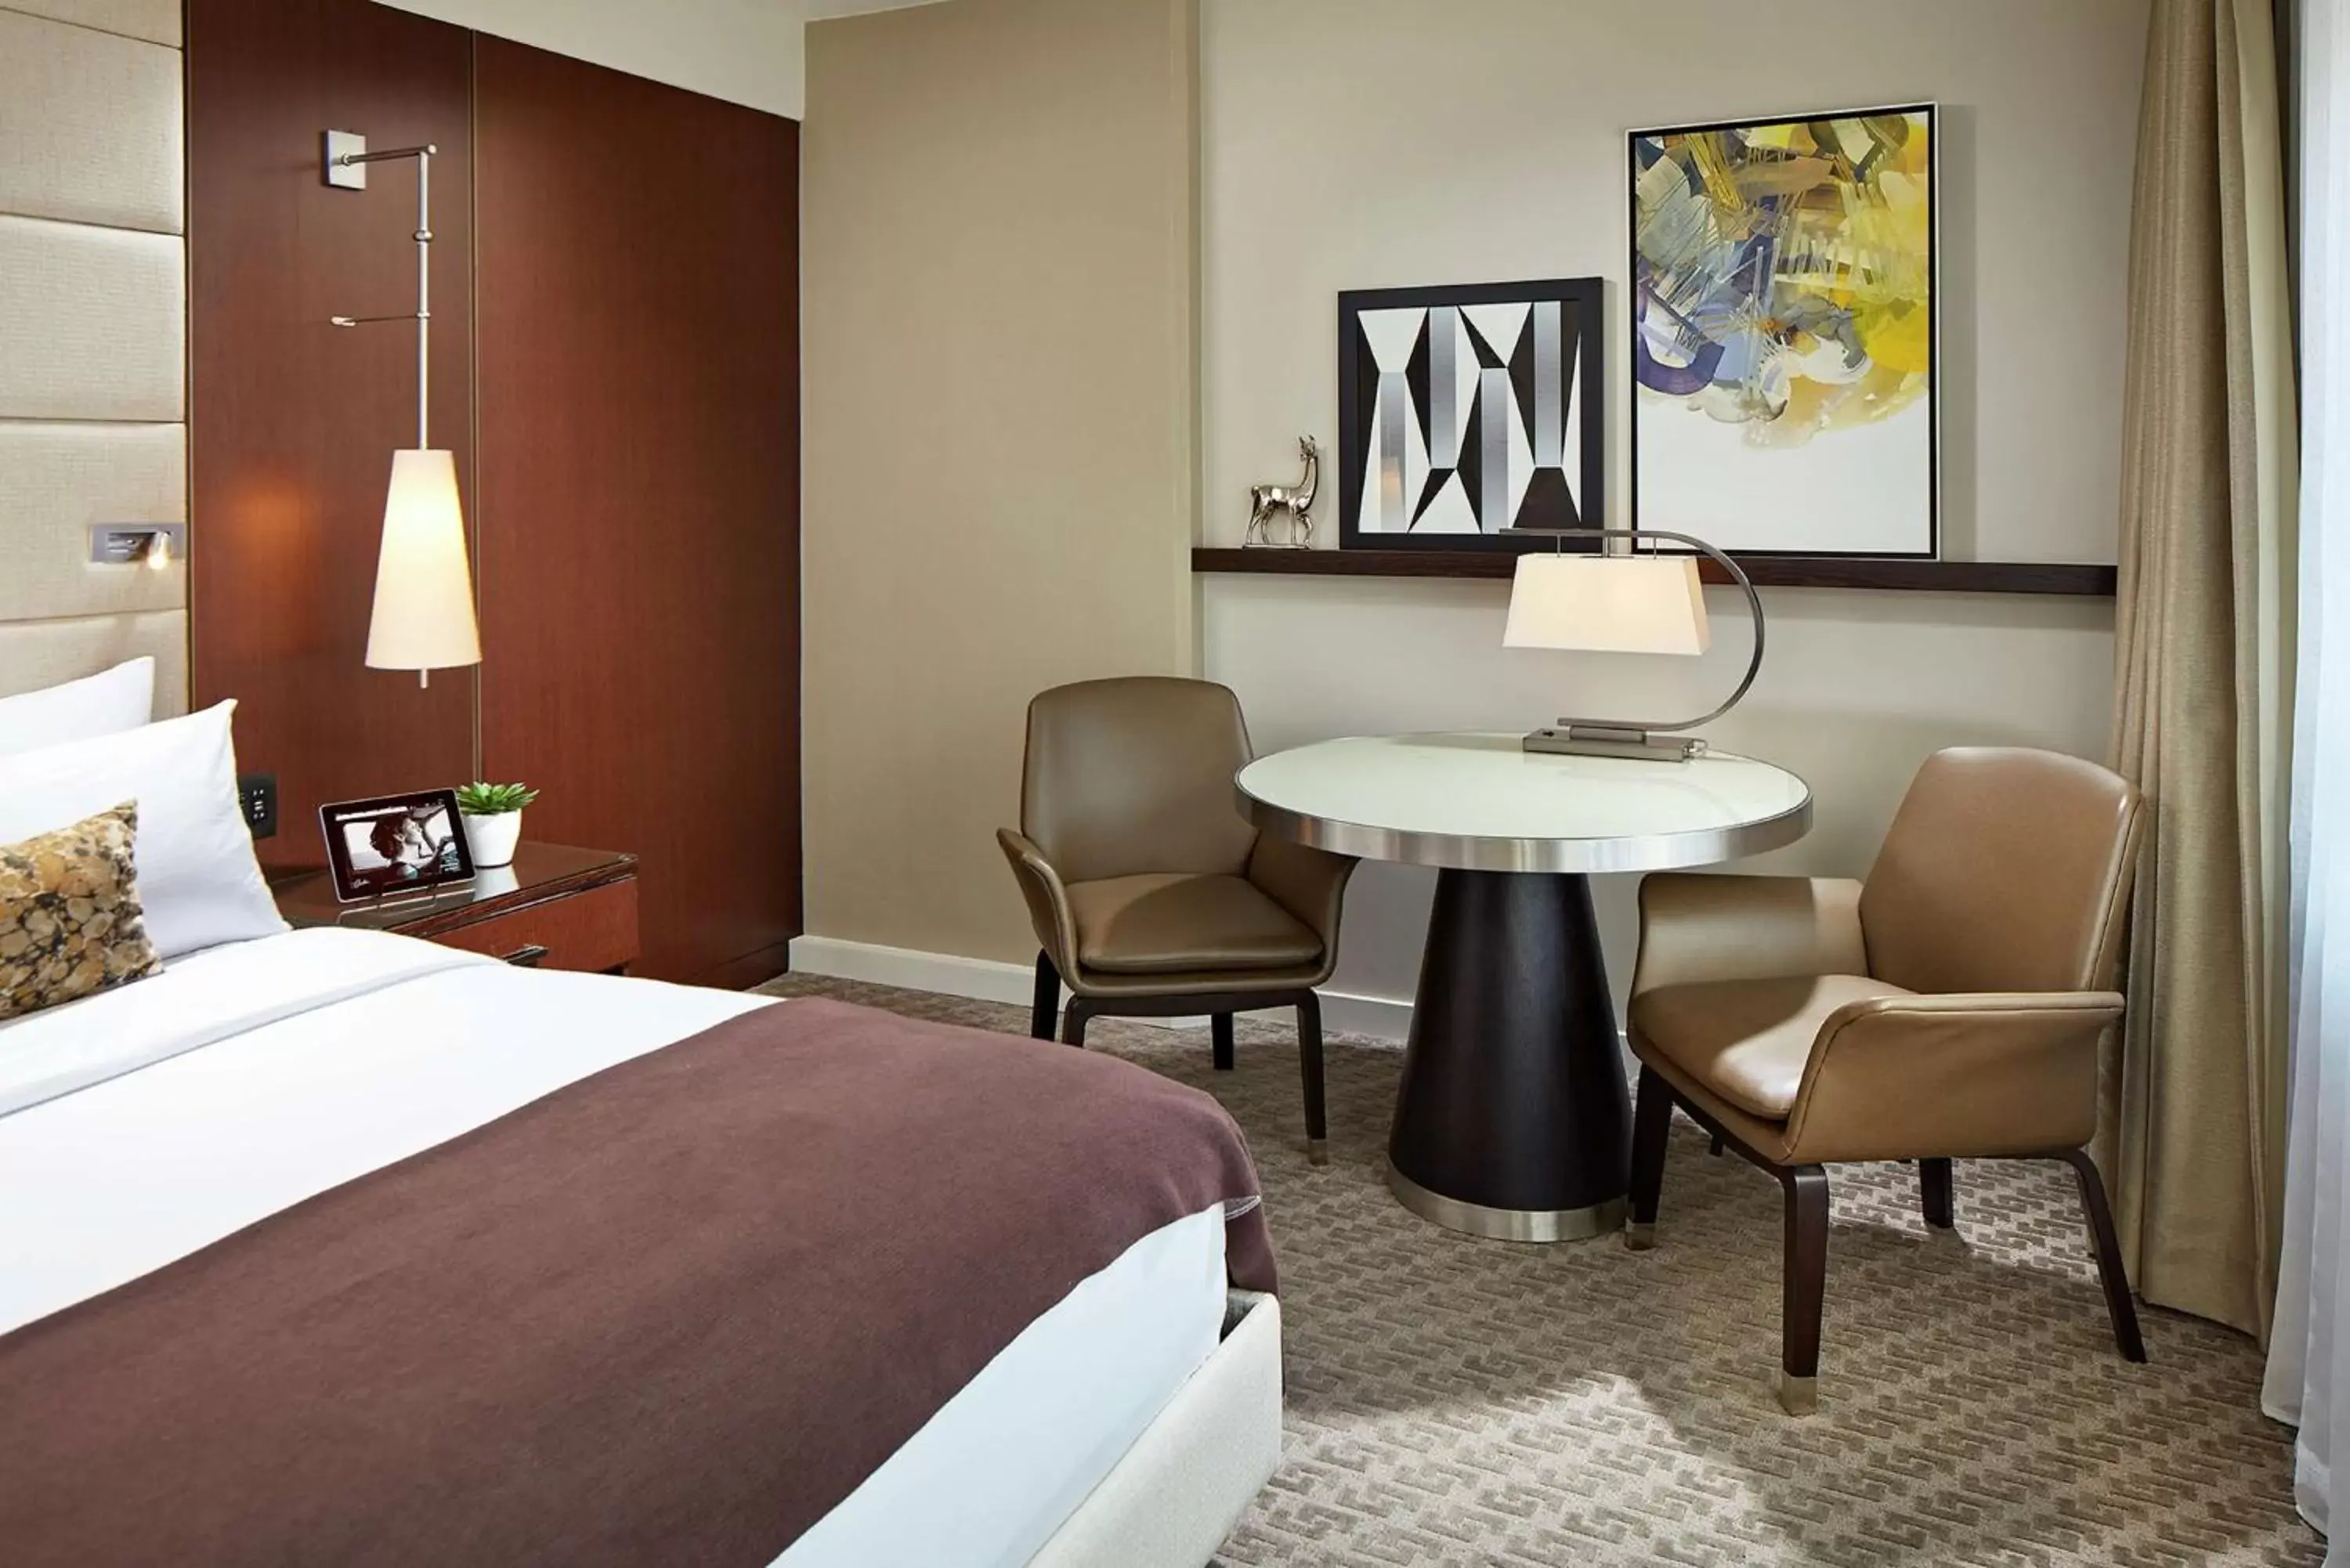 Premium King Room in The Statler Dallas, Curio Collection By Hilton